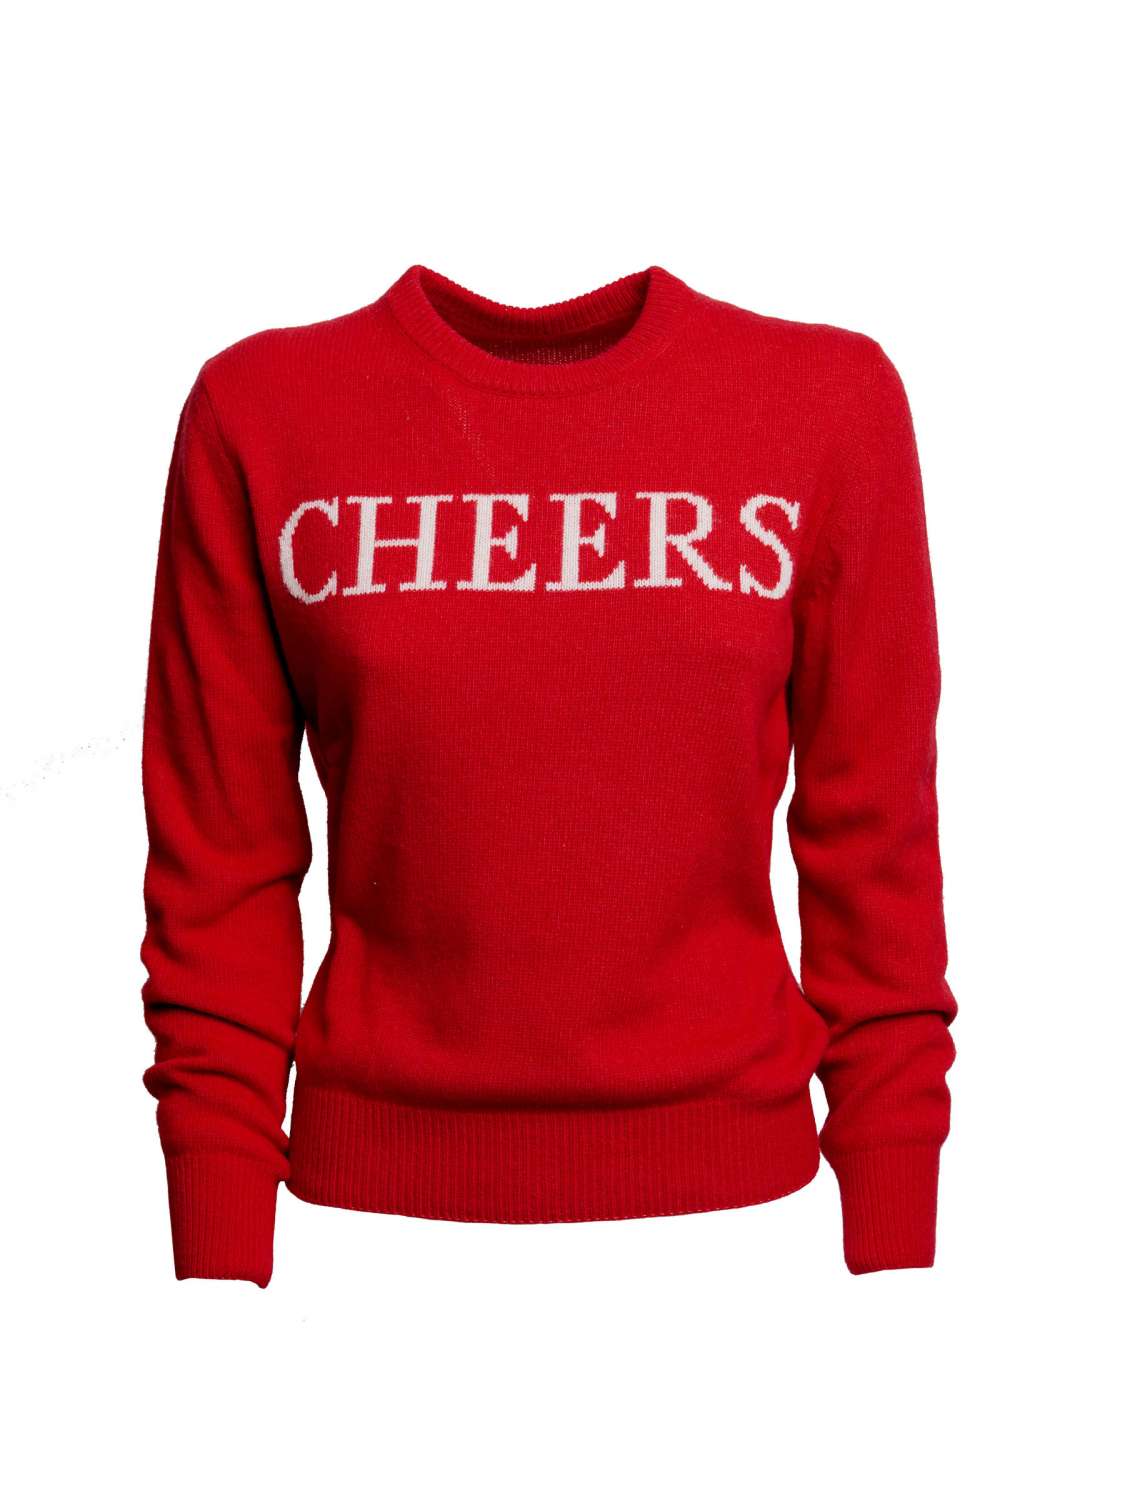 "CHEERS" Cashmere Wool Sweater